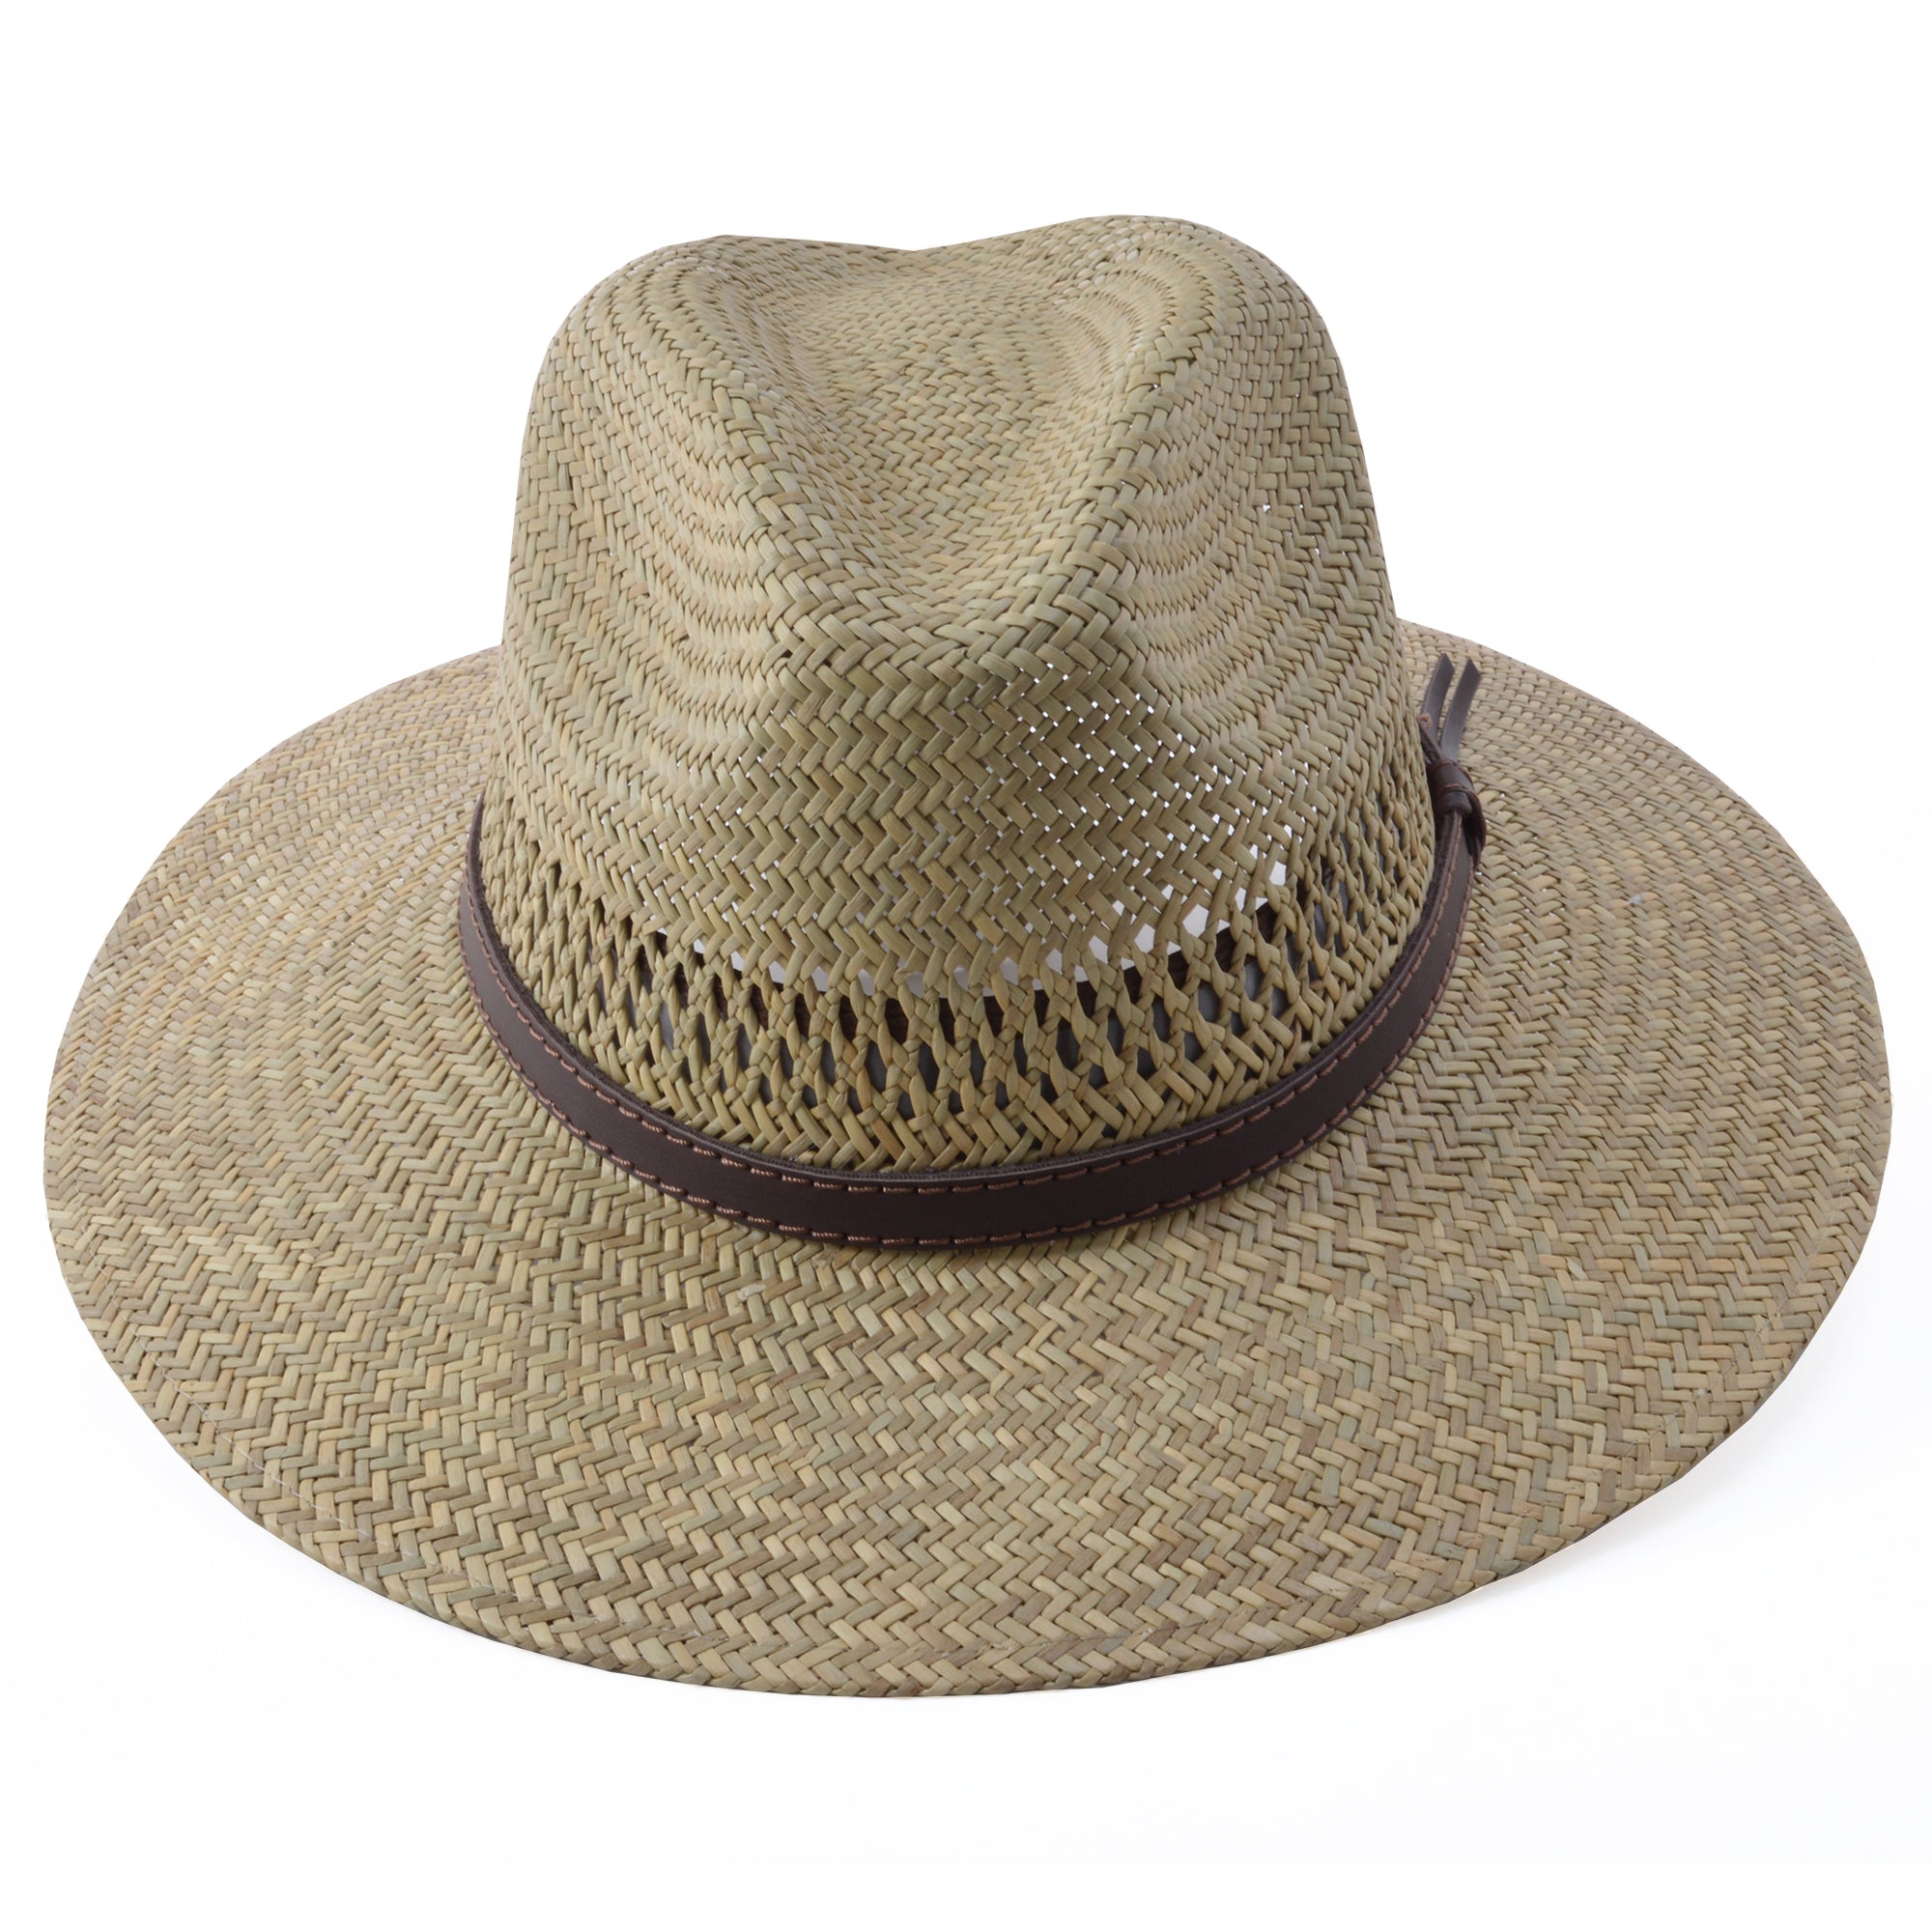 Stetson Childress Vented Seagrass Straw Hat - 0